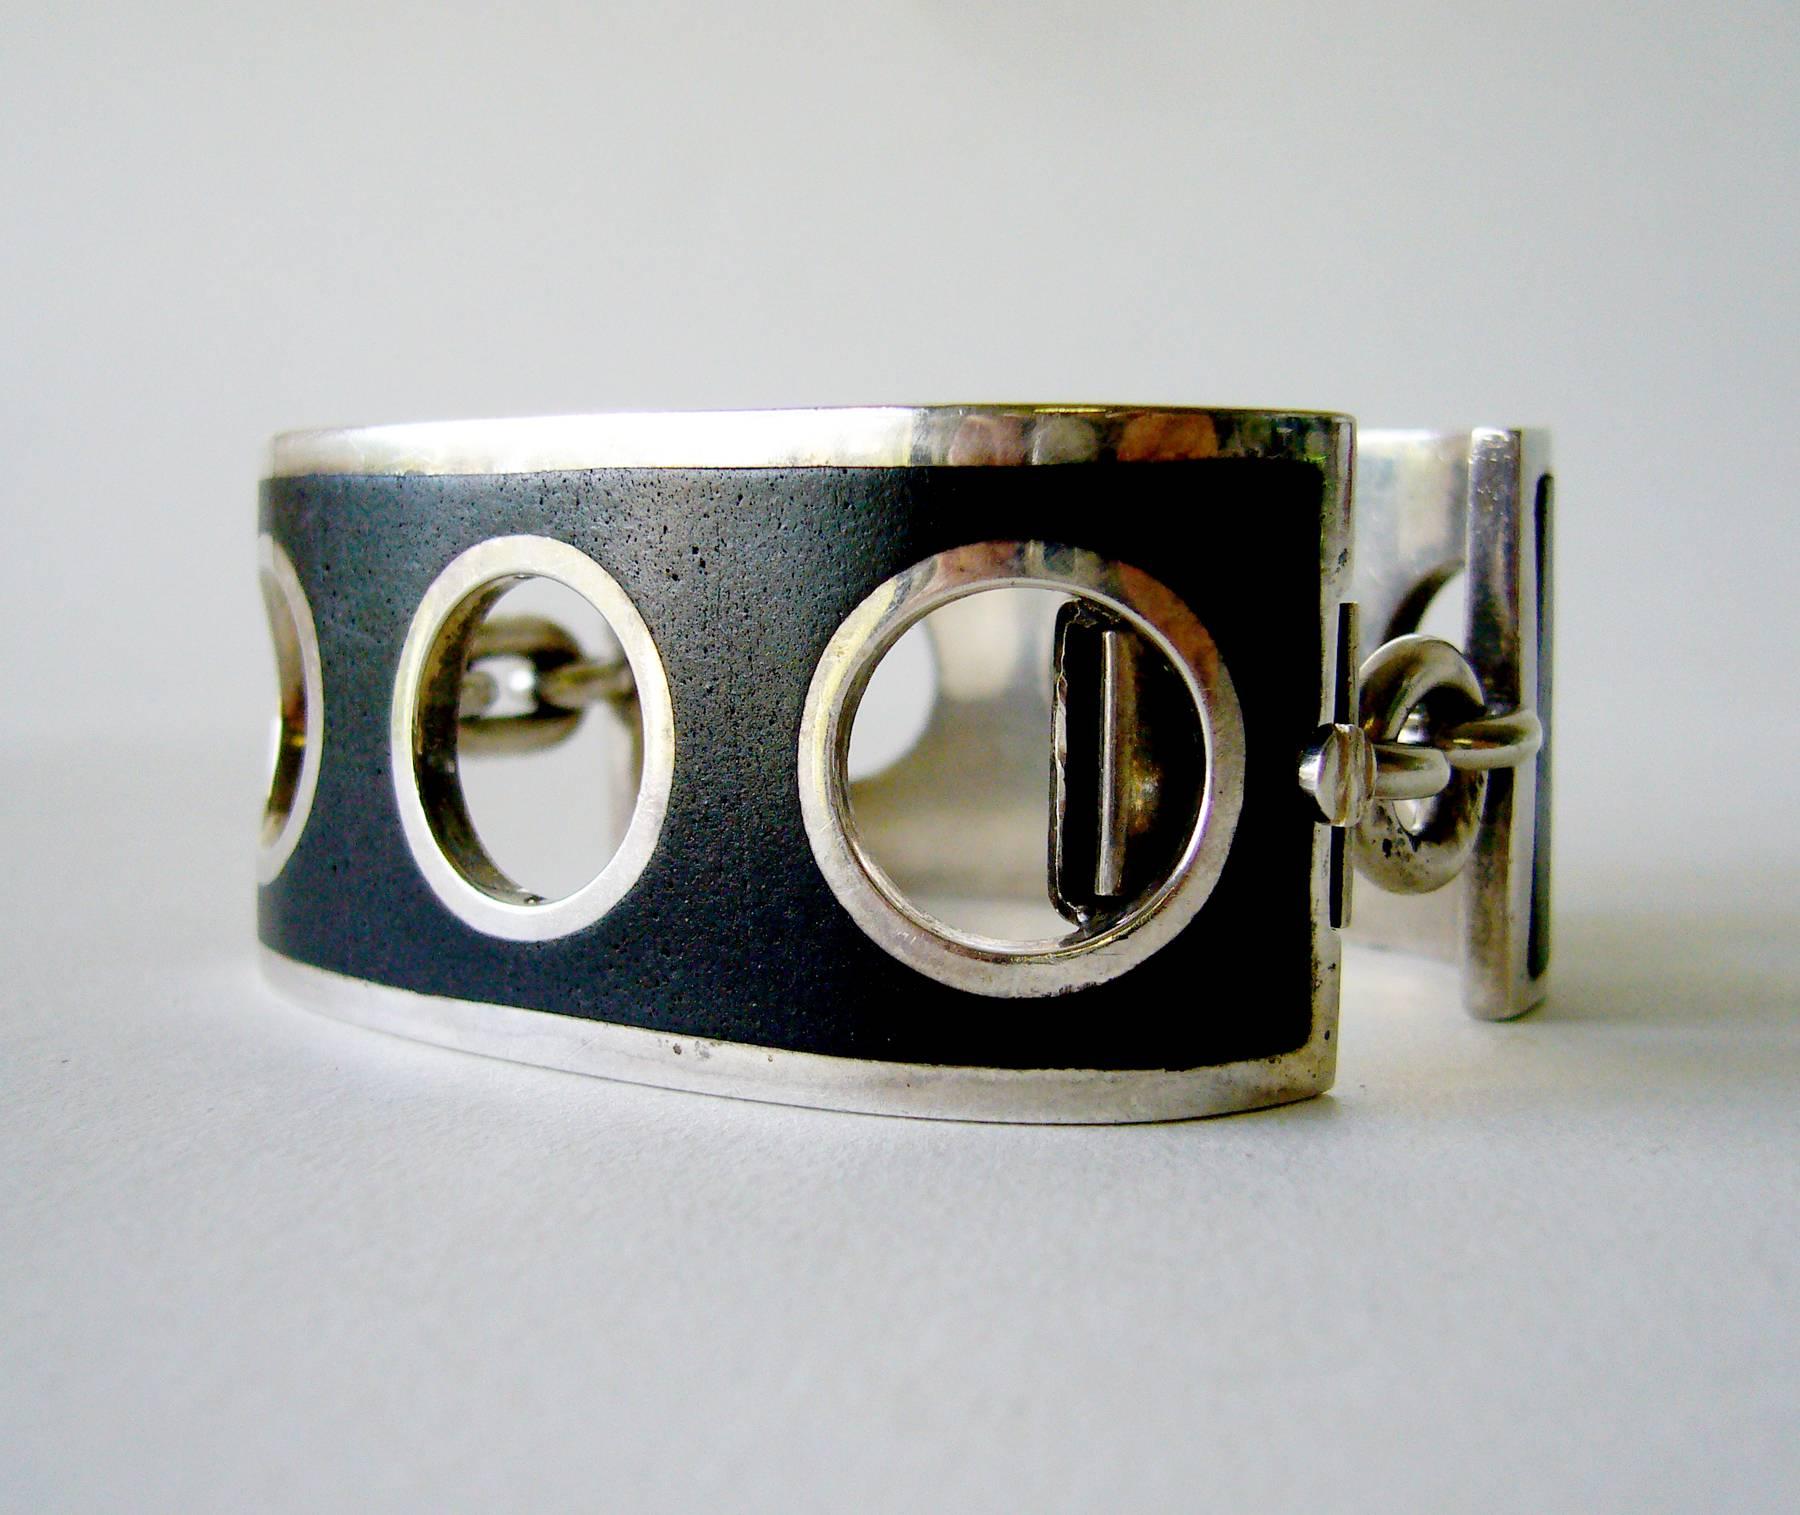 Sterling silver with black inlay shackle bracelet designed and created by José Maria Puig Doria of Spain.  Bracelet has a bold, geometric design and has very good weight.  For a smaller sized wrist, inner circumference being 6.5